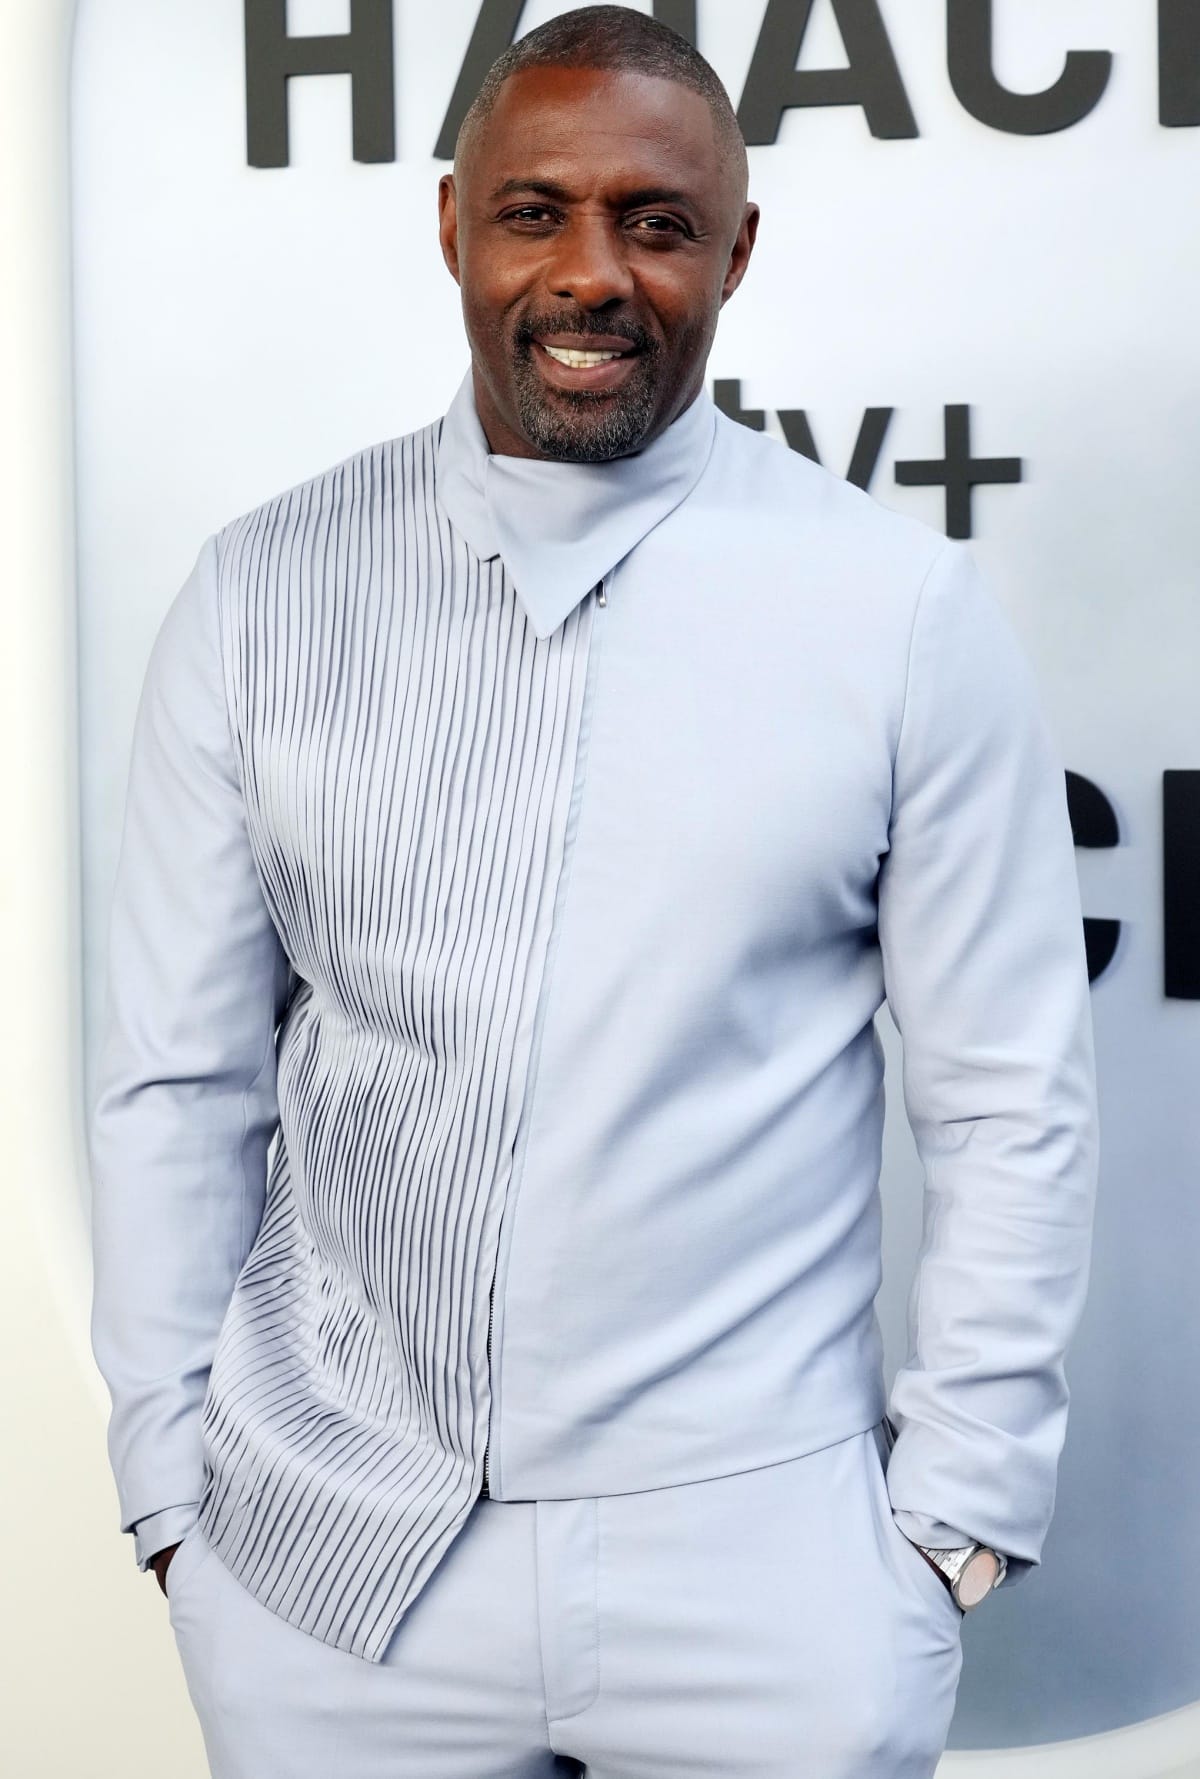 Idris Elba has left an indelible mark in the entertainment industry with scene-stealing roles and his alluring charm that made him one of Hollywood’s finest heartthrobs